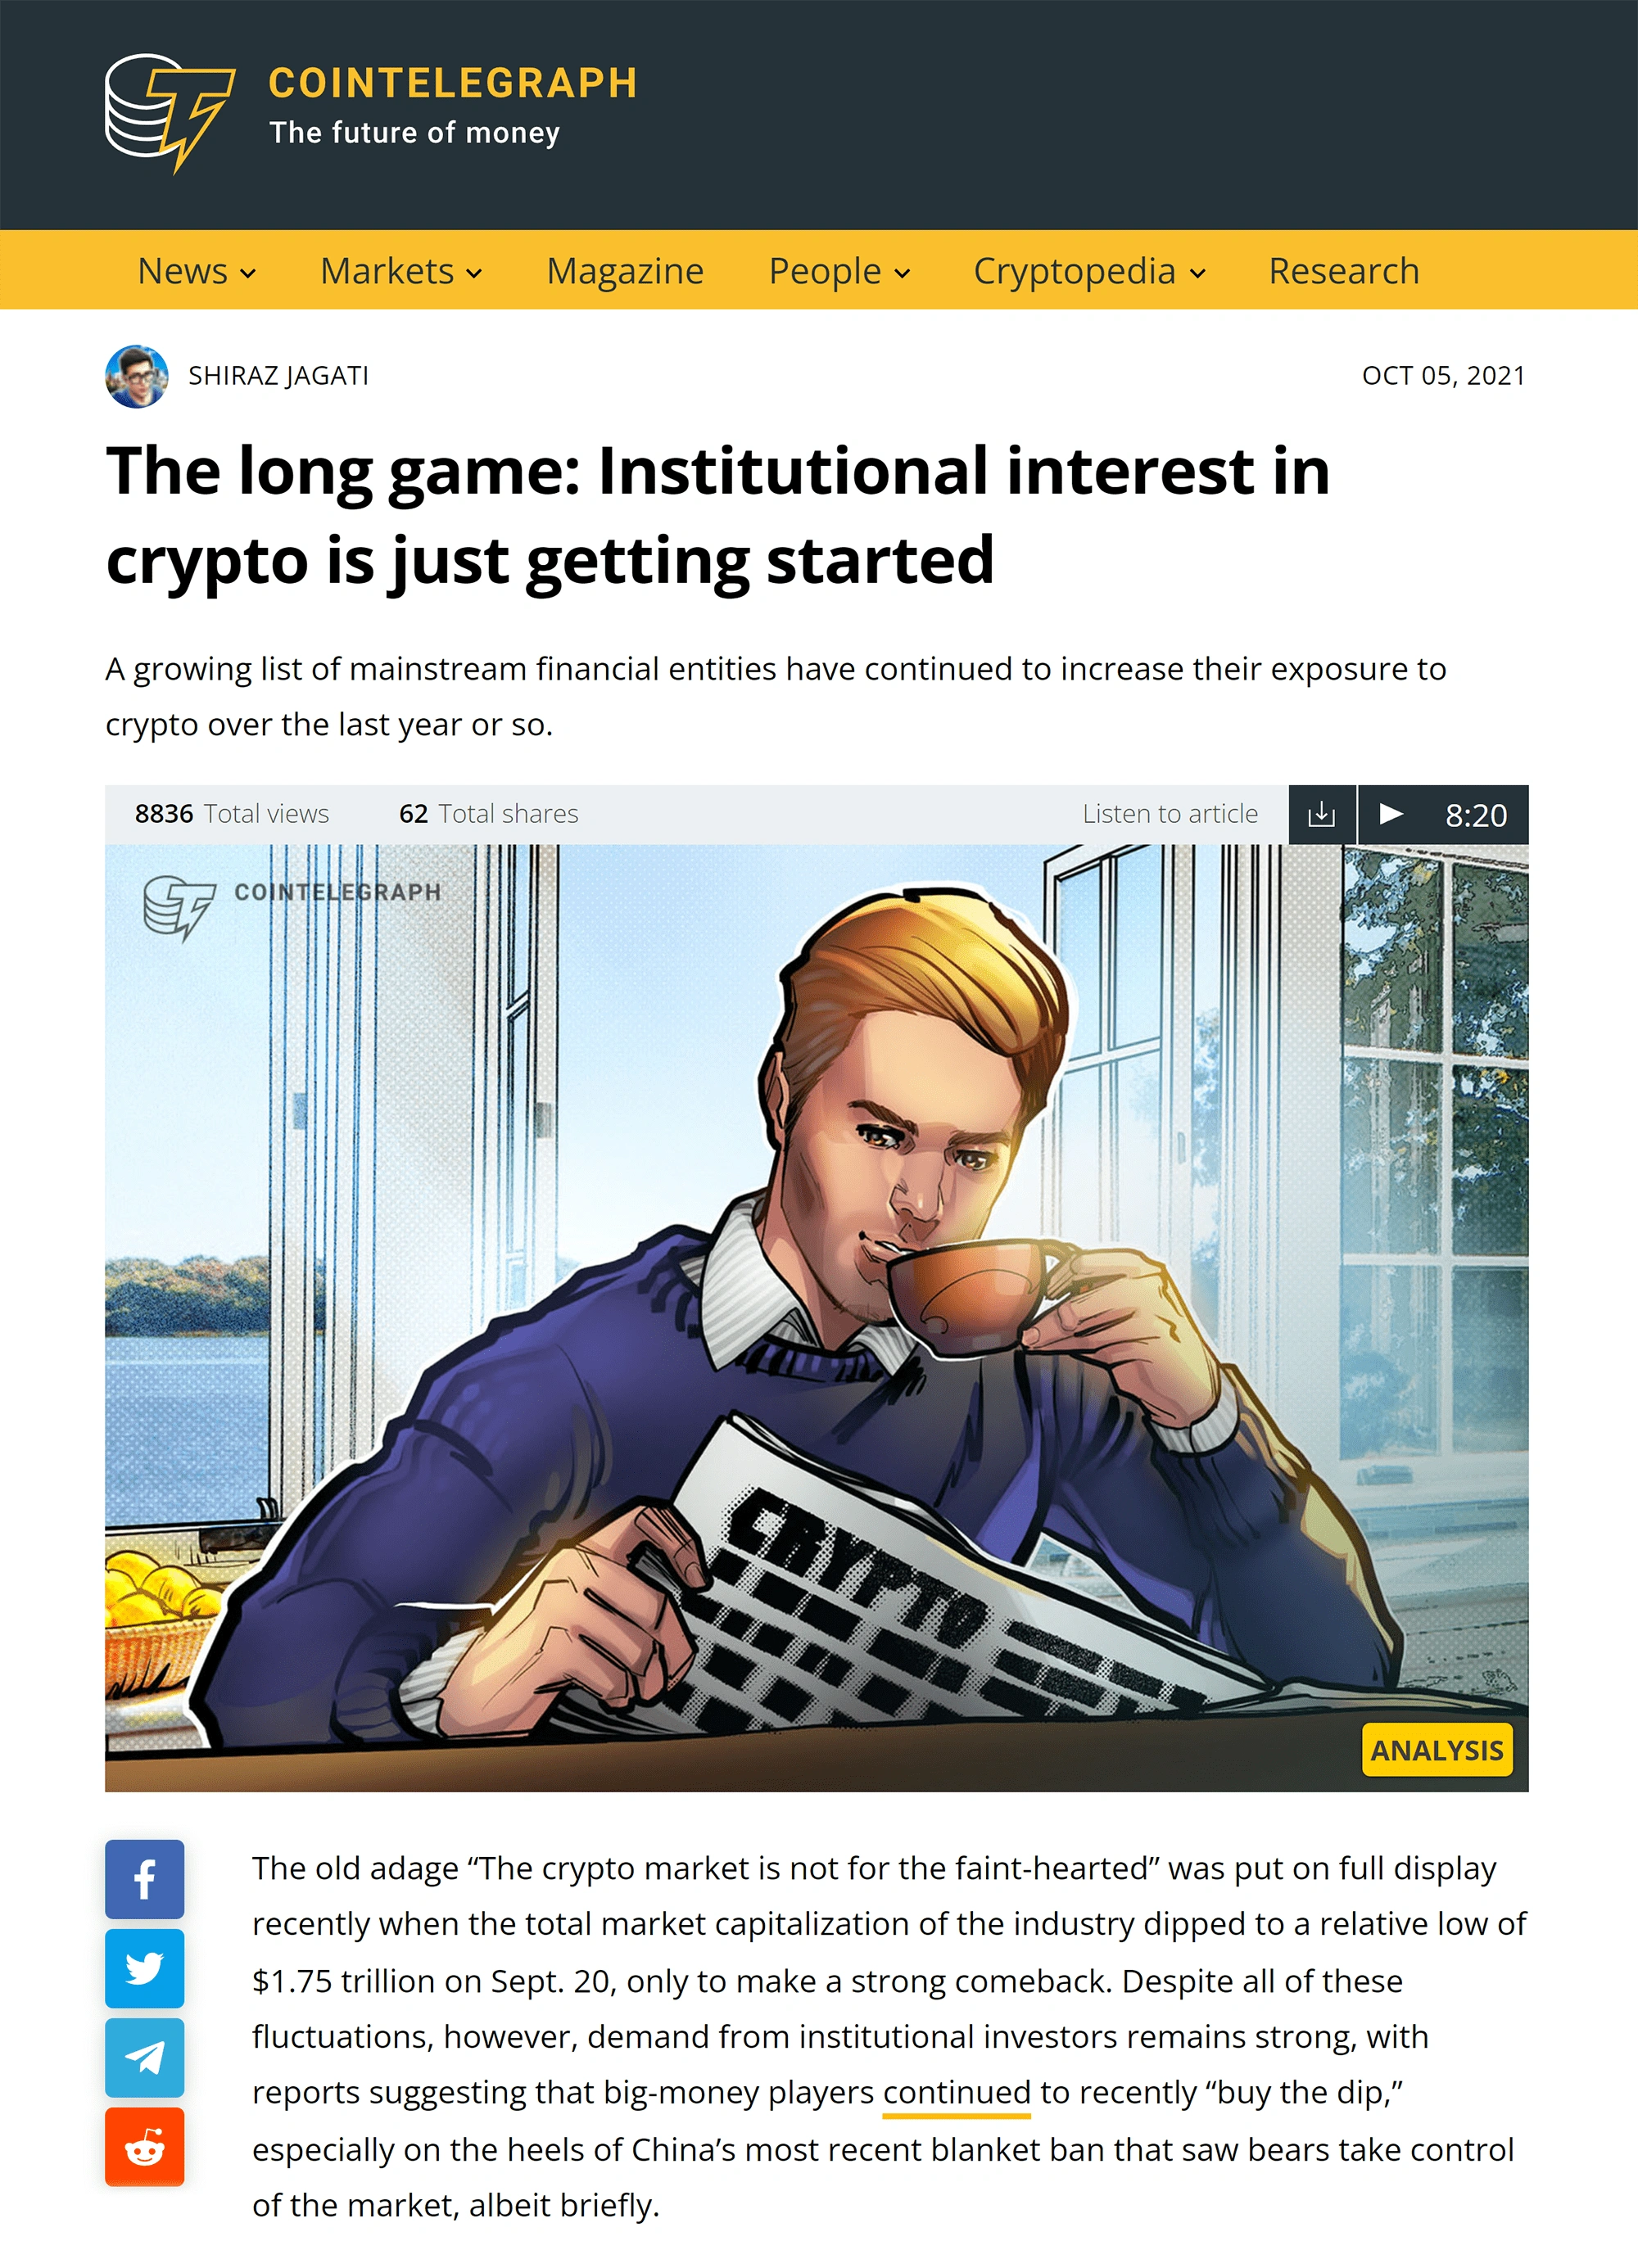 enterprise-Interest-in-crypto-min.png